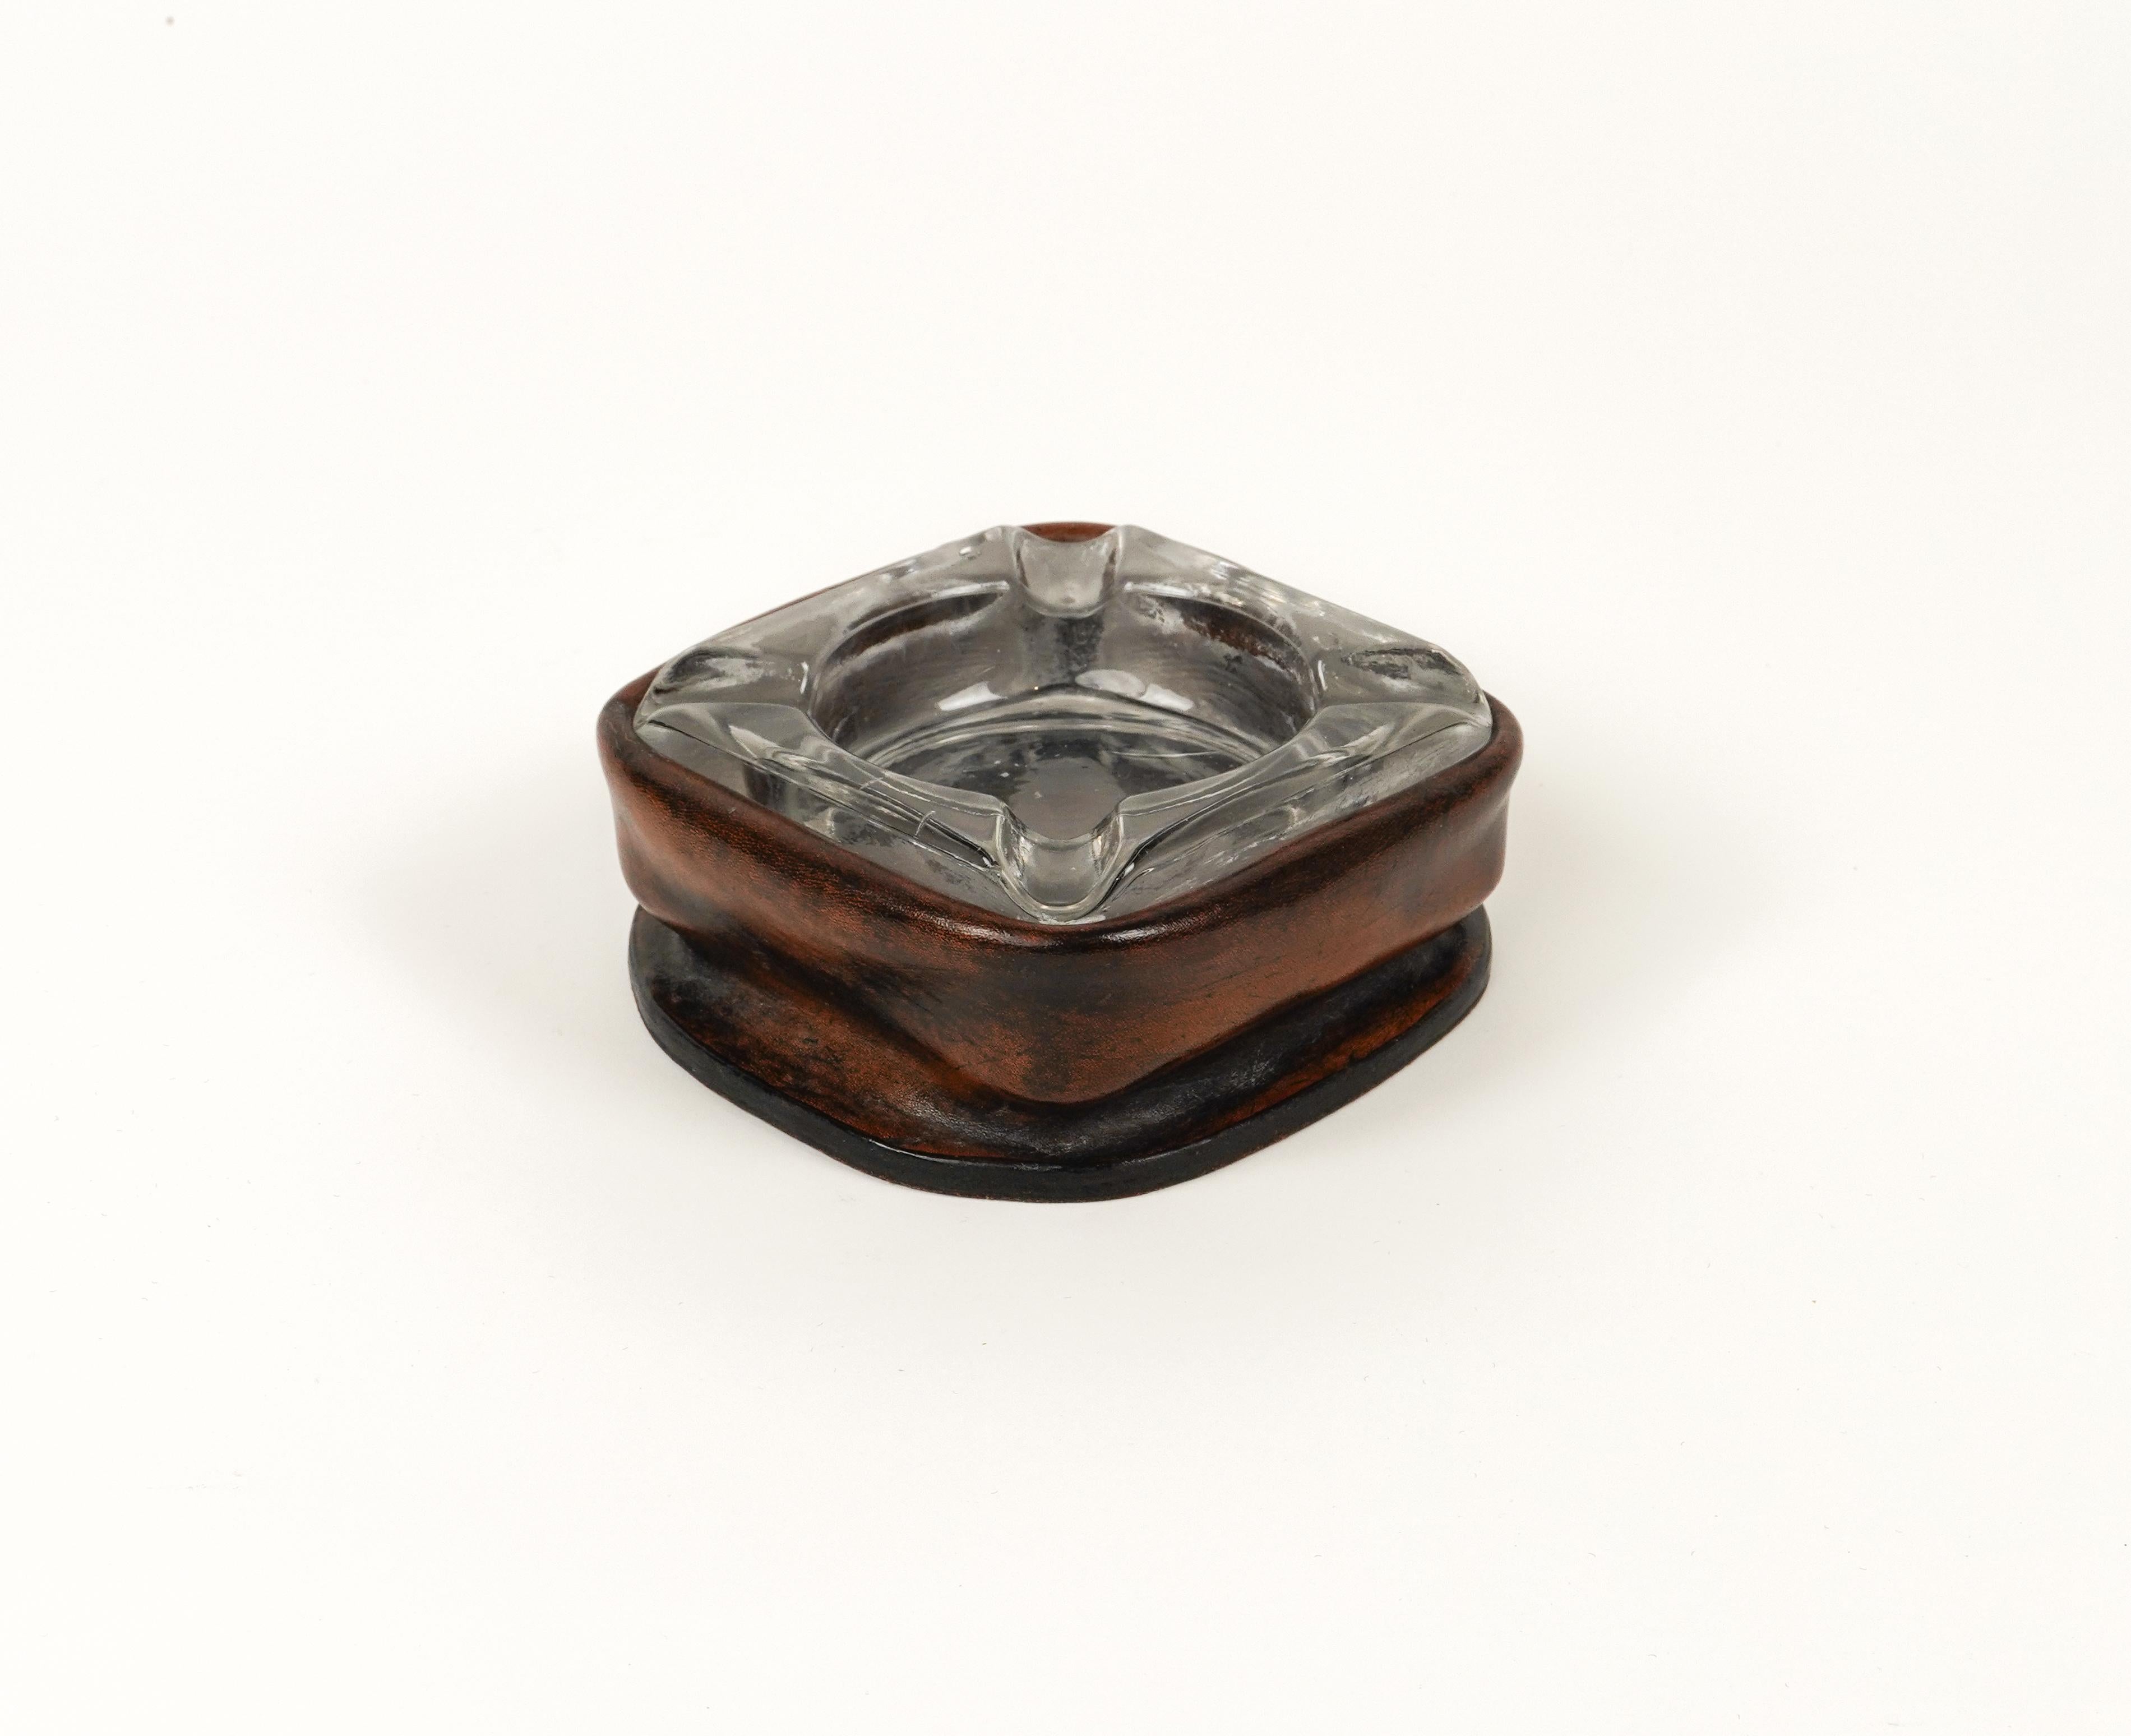 Midcentury Squared Ashtray in Leather and Glass Jacques Adnet Style, Italy 1970s For Sale 4